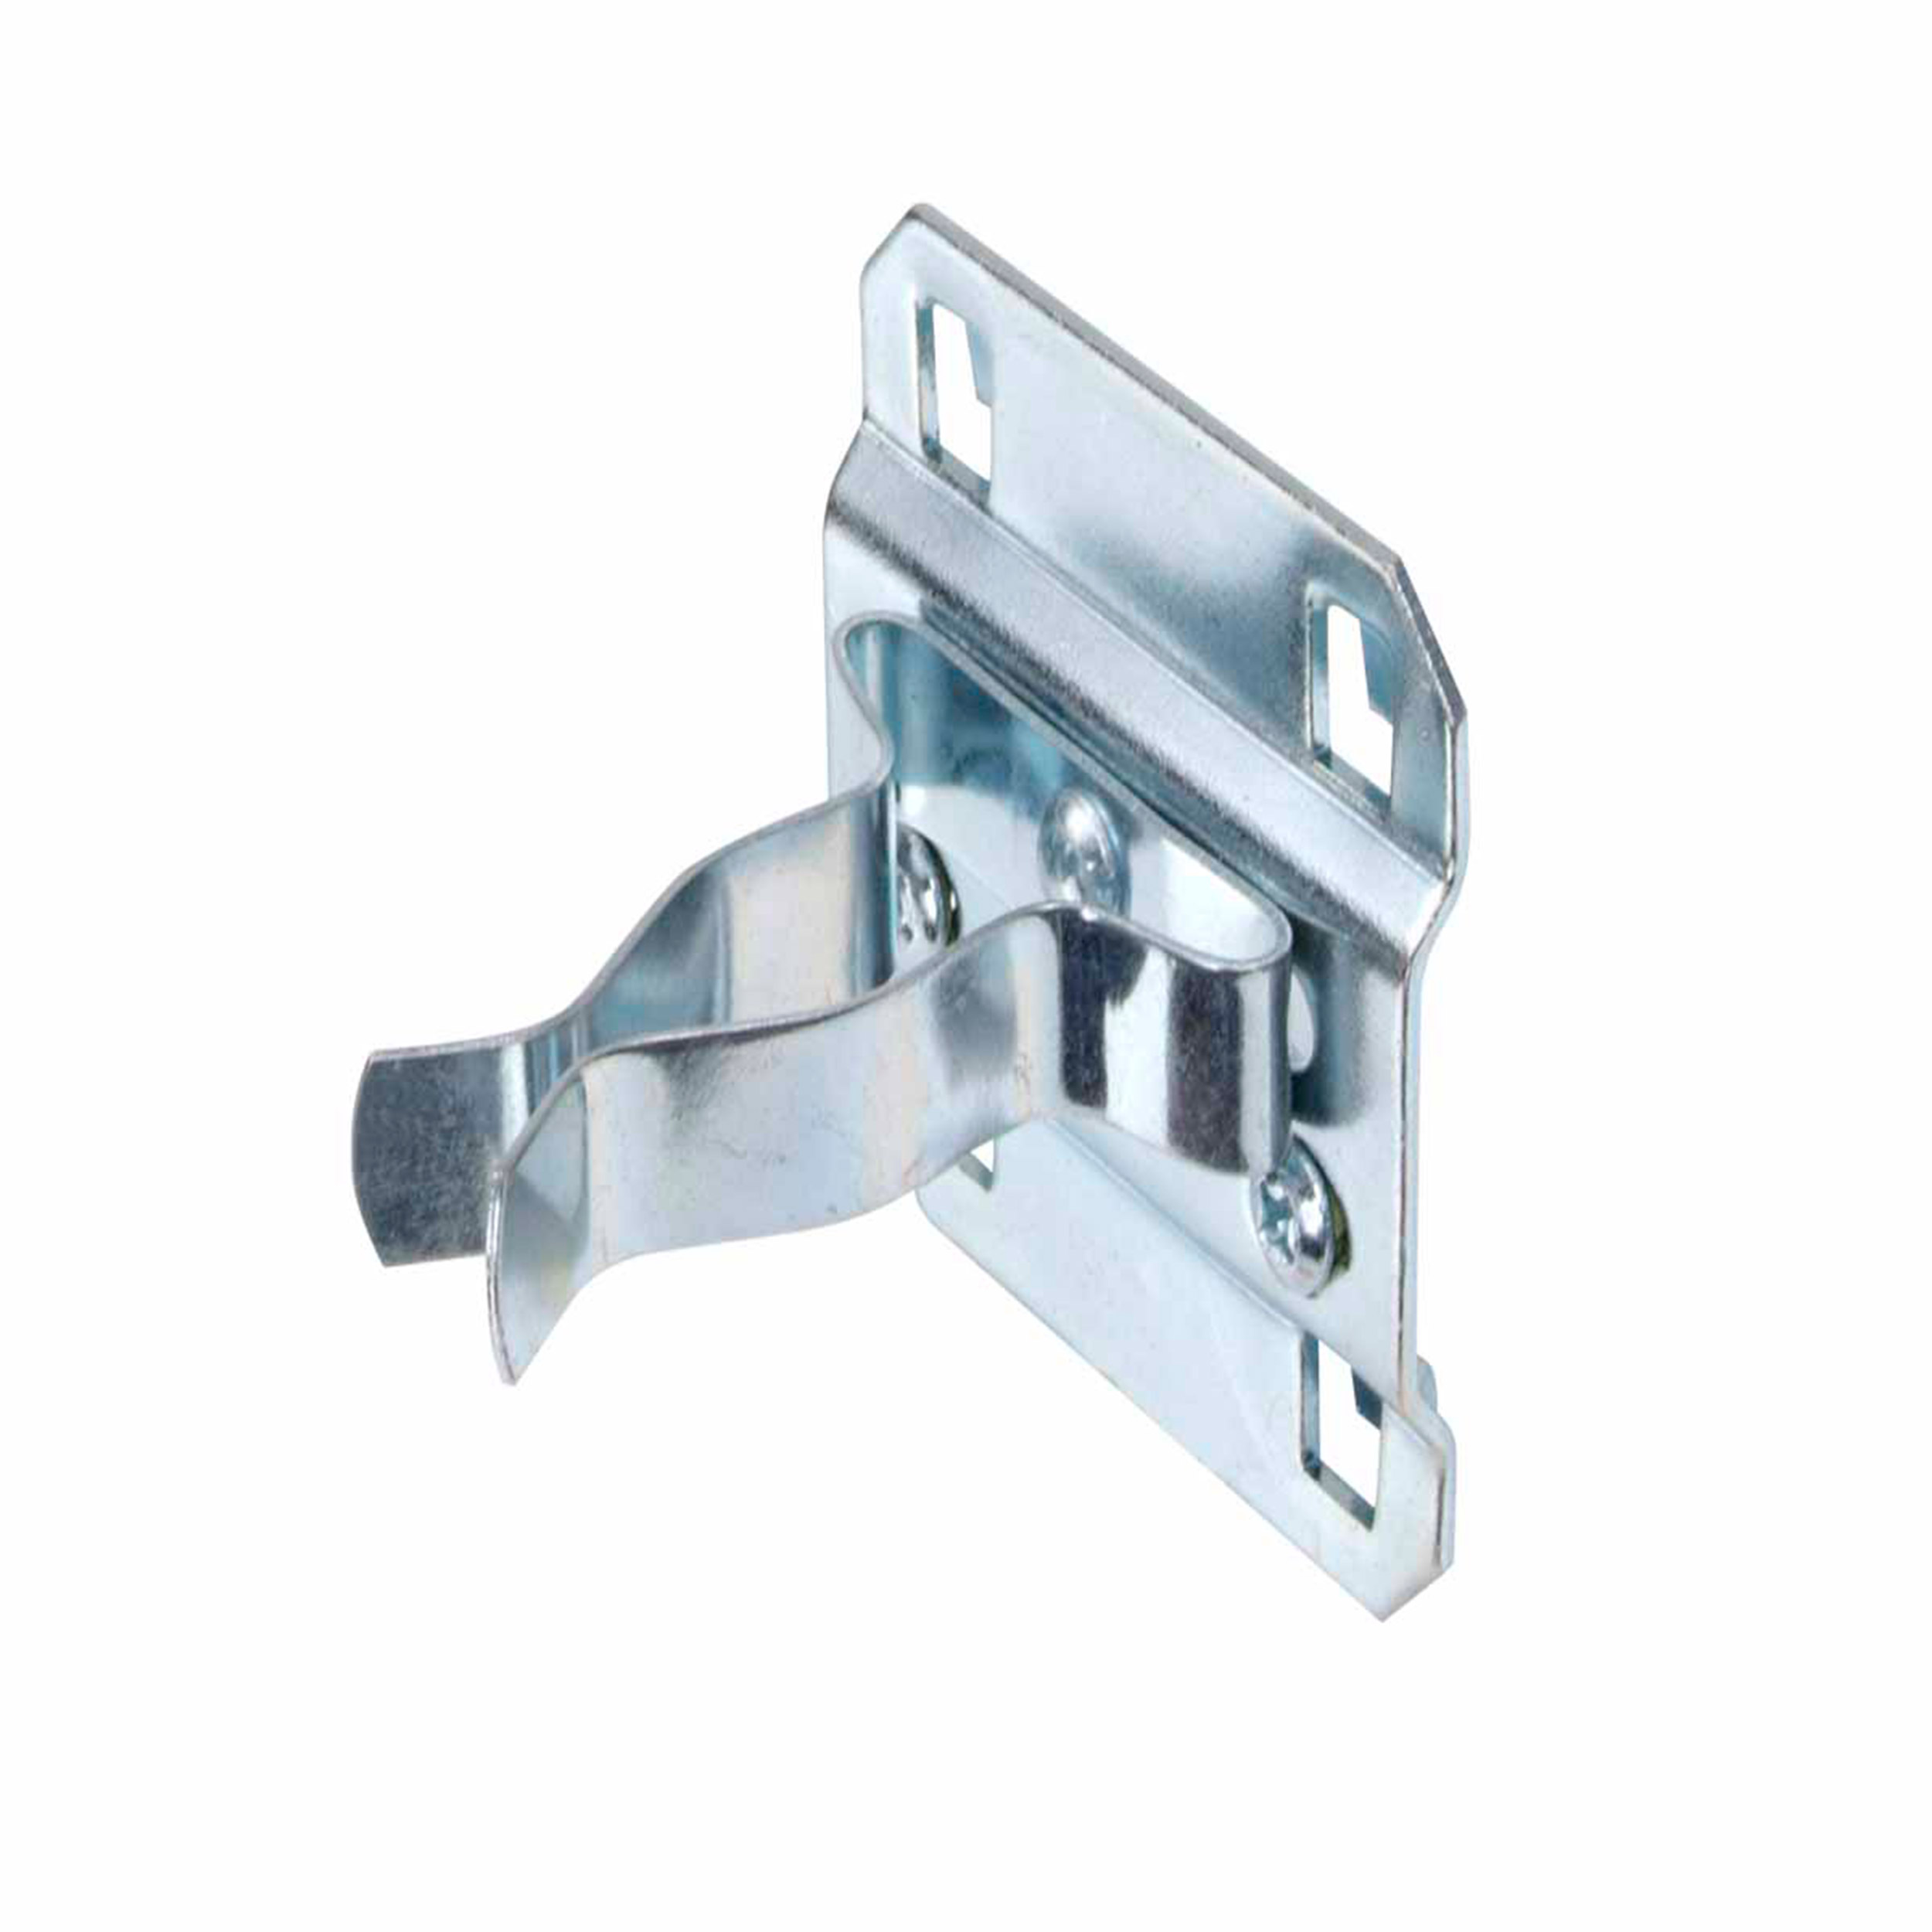 3/4 In. To 1-1/4 In. Hold Range 2 In. Projection, Zinc Plated/chromate Dipped Steel Extended Spring Clip For Locboard, 5